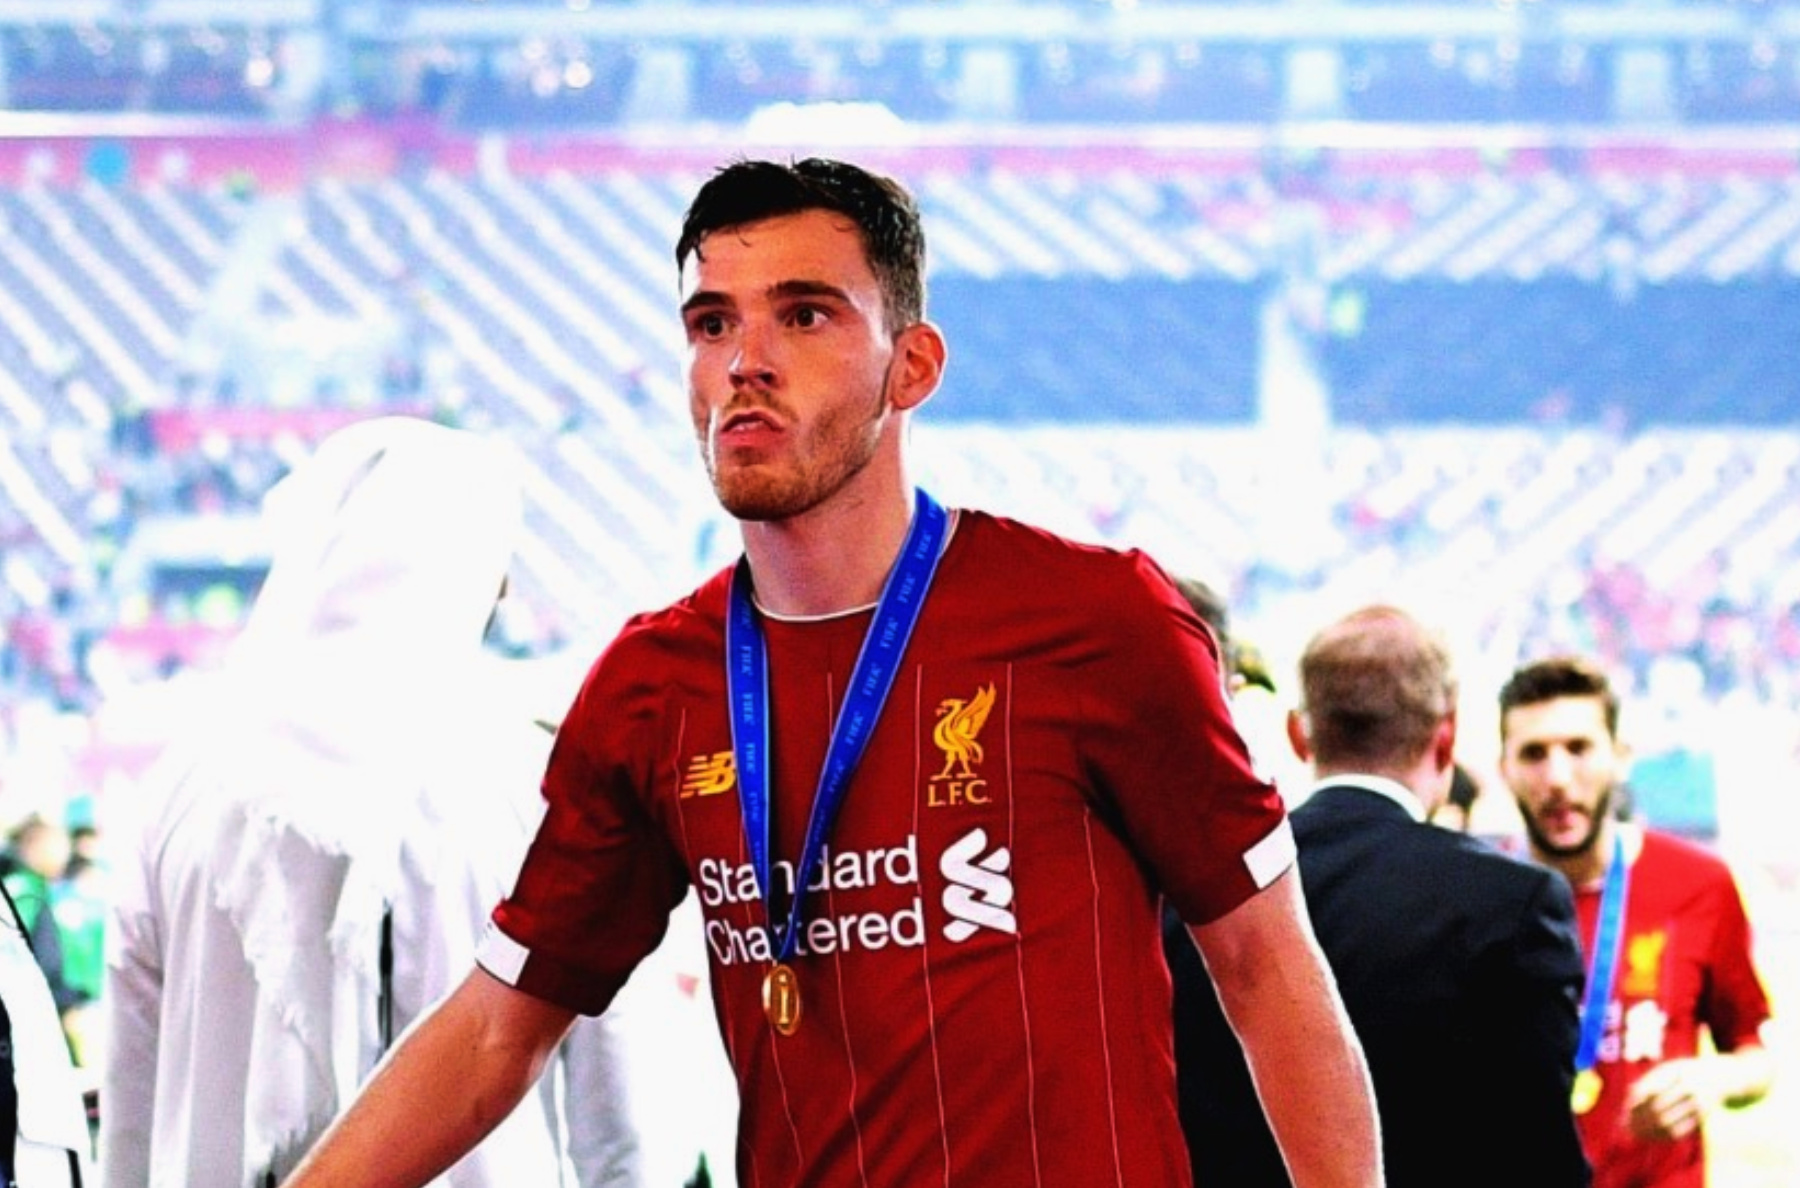 “Thinks he’s Dani Alves” – Smug tweet from Liverpool left back Andy Robertson gets met with utter disdain from rival fans